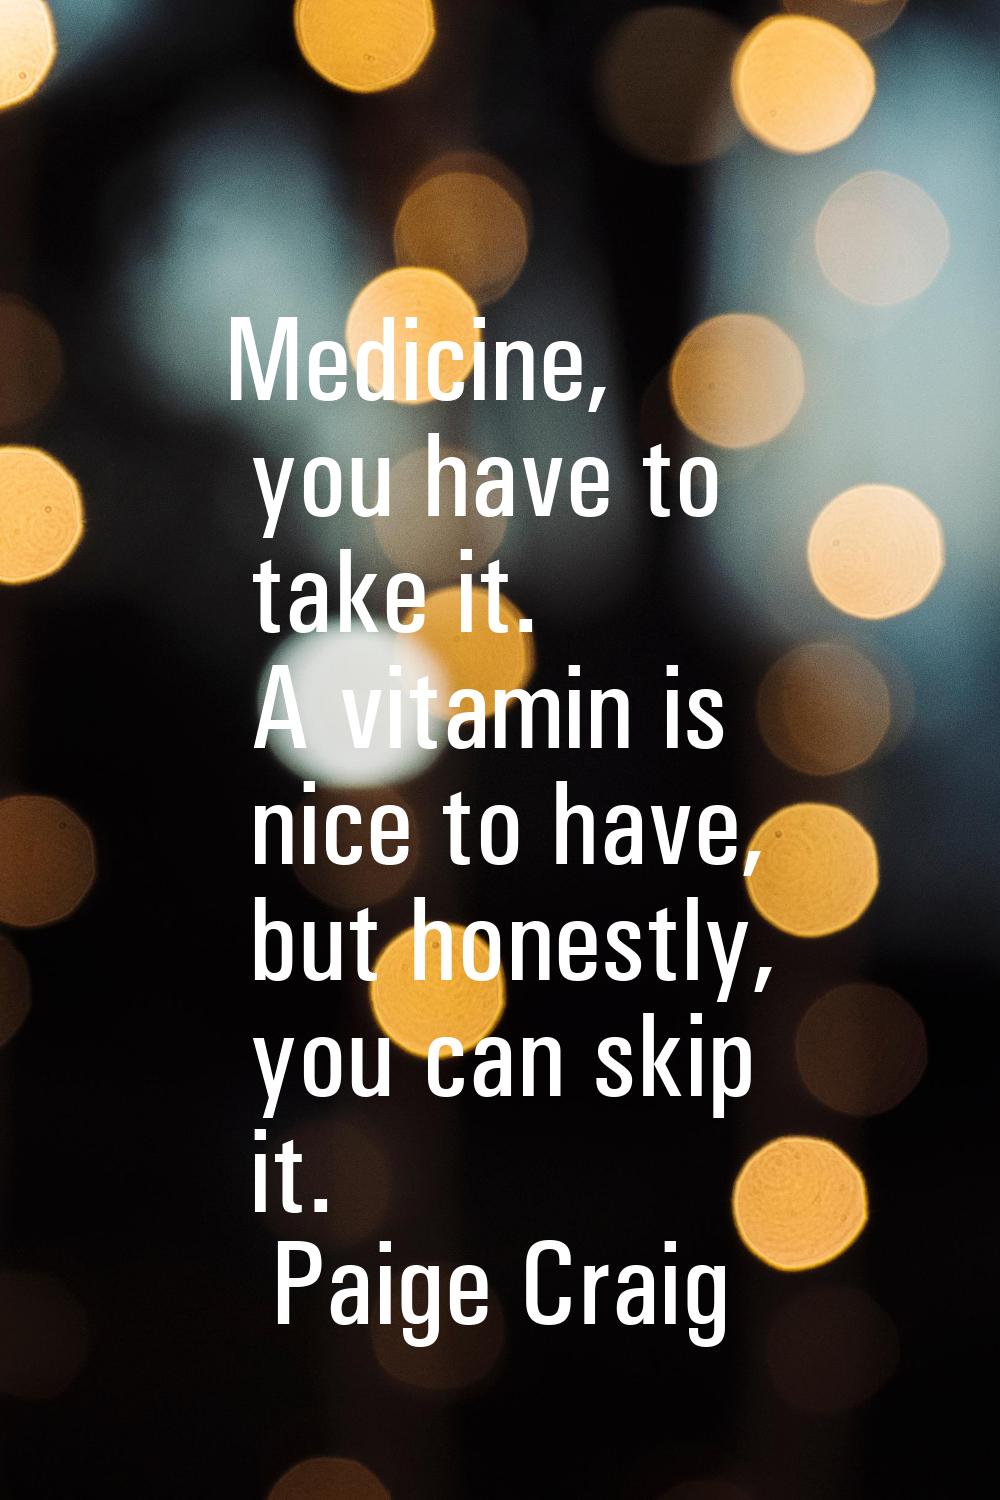 Medicine, you have to take it. A vitamin is nice to have, but honestly, you can skip it.